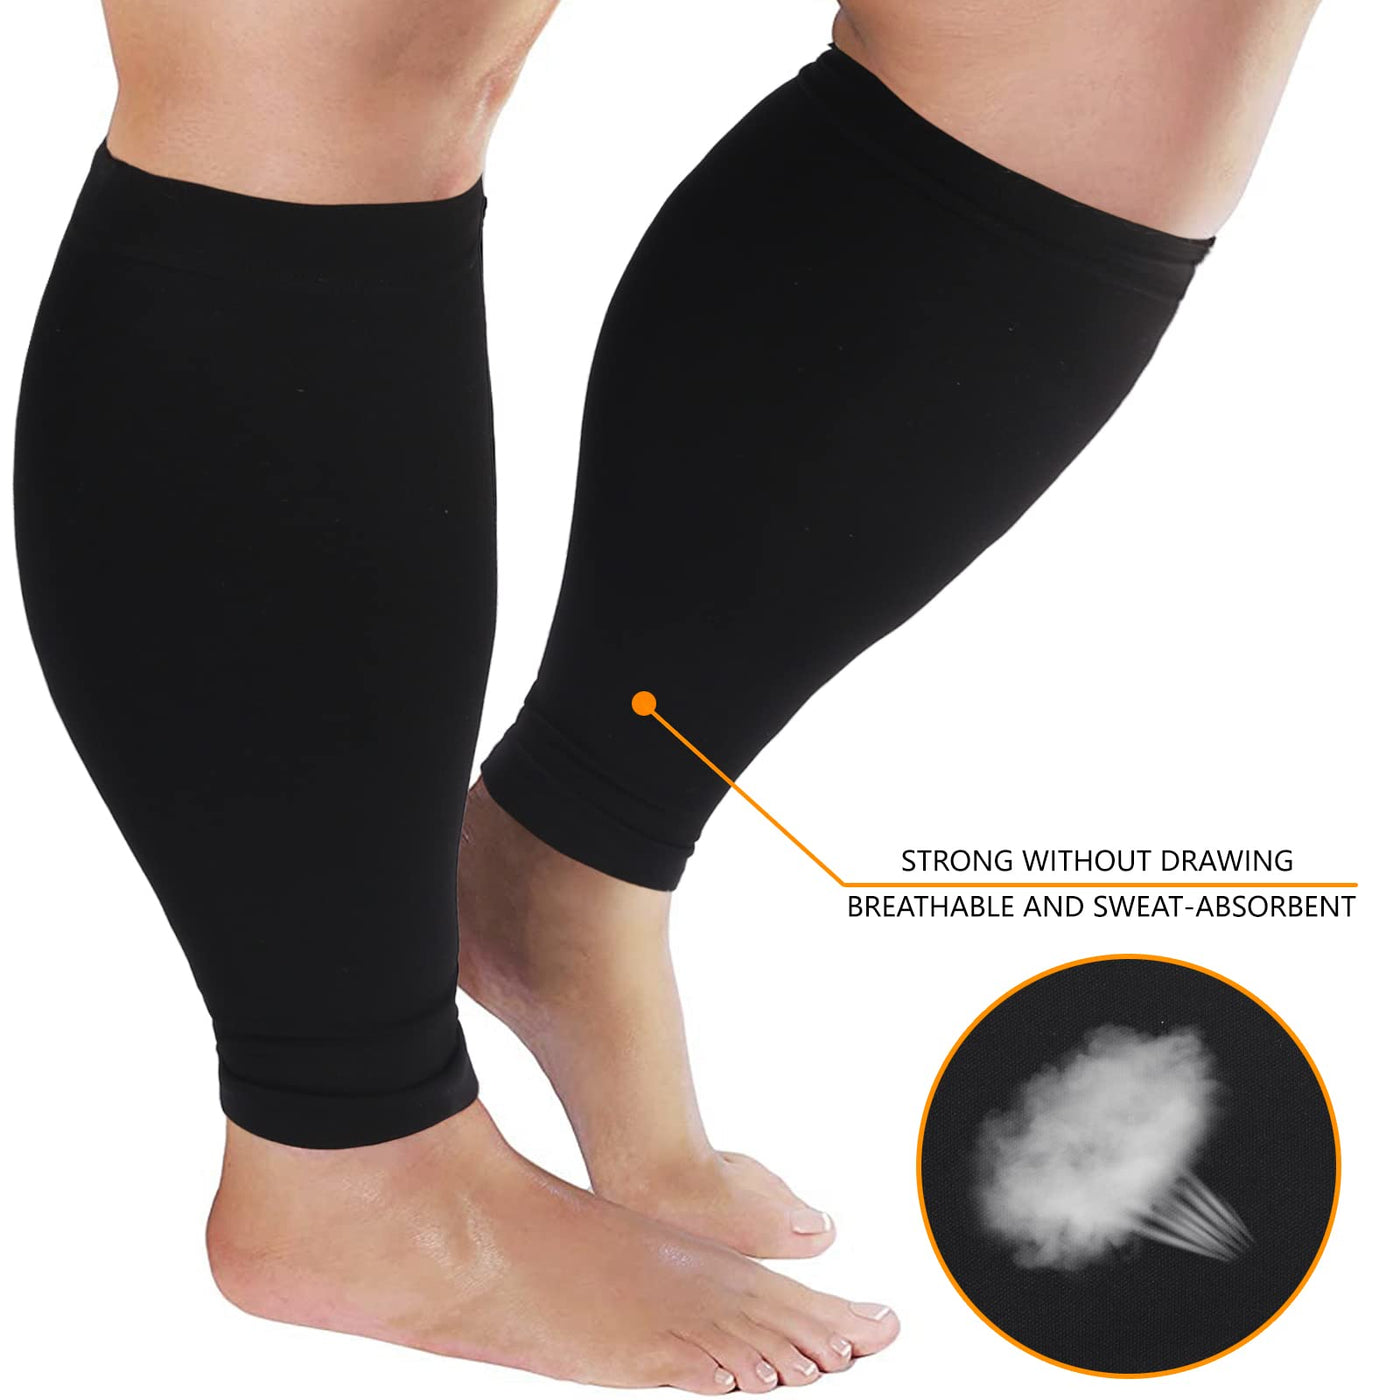 Plus Size Compression Sleeves for Calves Women Wide Calf Compression Legs  Sleeves Men 7XL, Relieve Varicose Veins, Edema, Swelling, Soreness, Shin  splints, for Work, Travel, Sports and Daily Wear Black XXXXXXX-Large